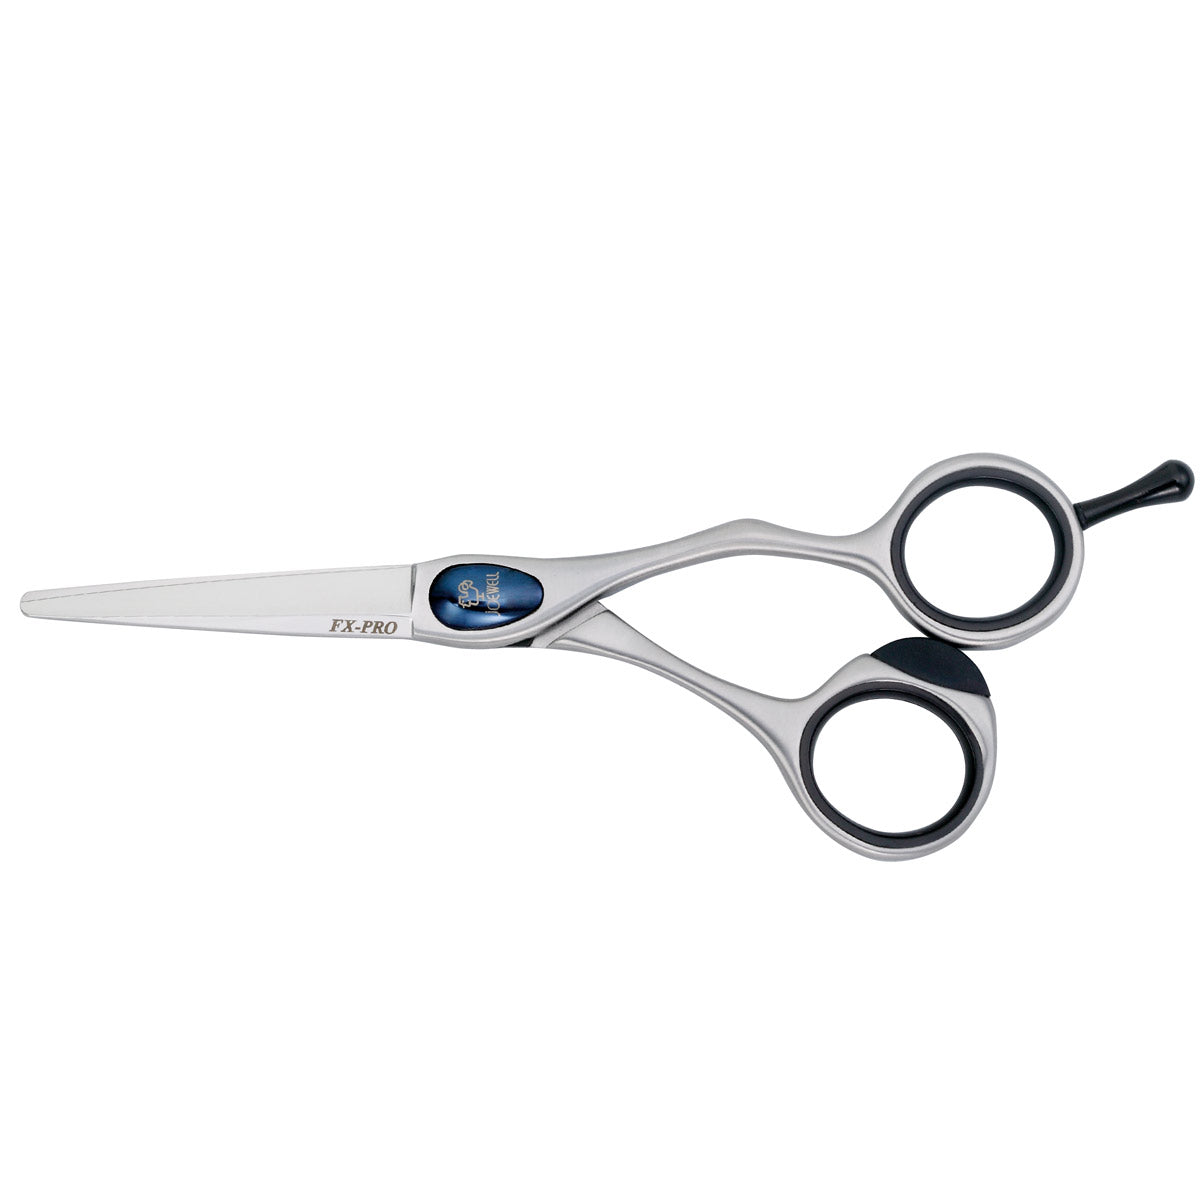 FXPRO 55 Super Alloy Genuine Joewell Professional Japanese Shears 